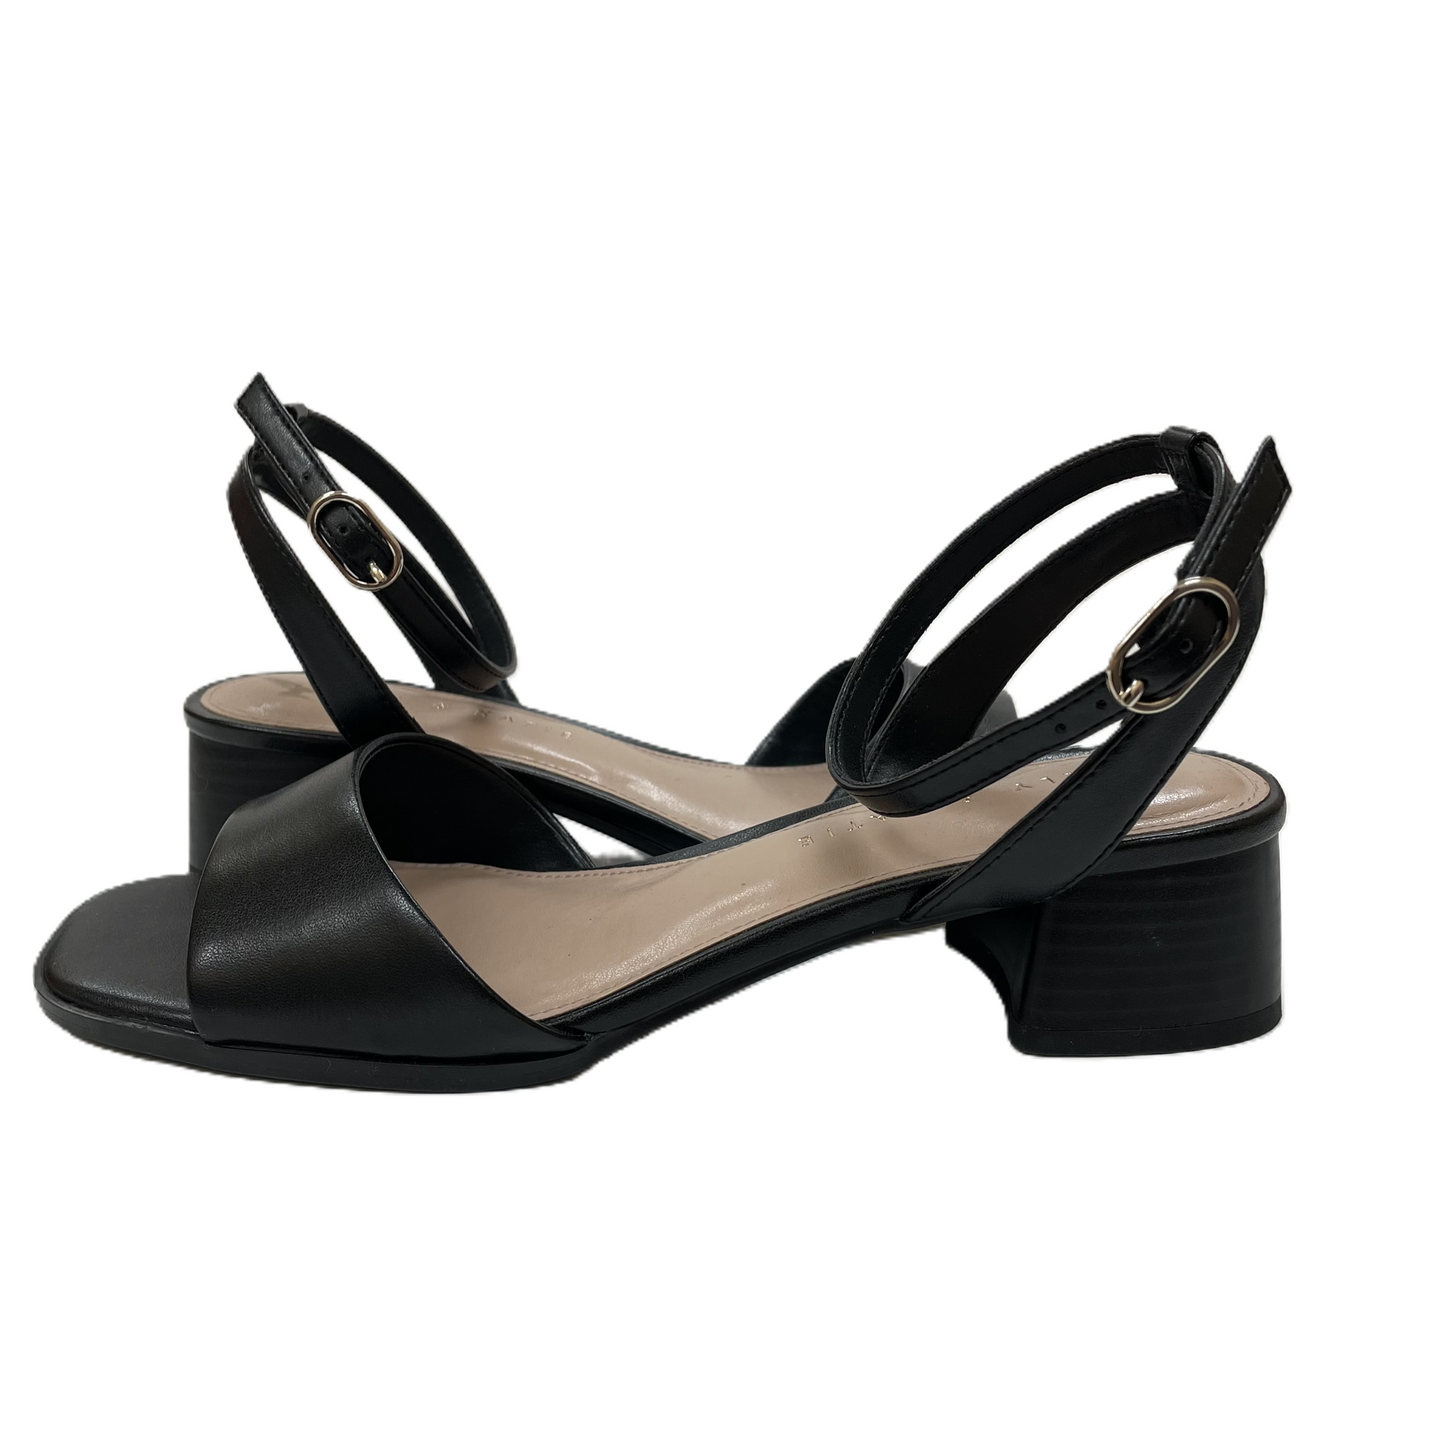 Black Sandals Heels Block By Kelly And Katie, Size: 7.5